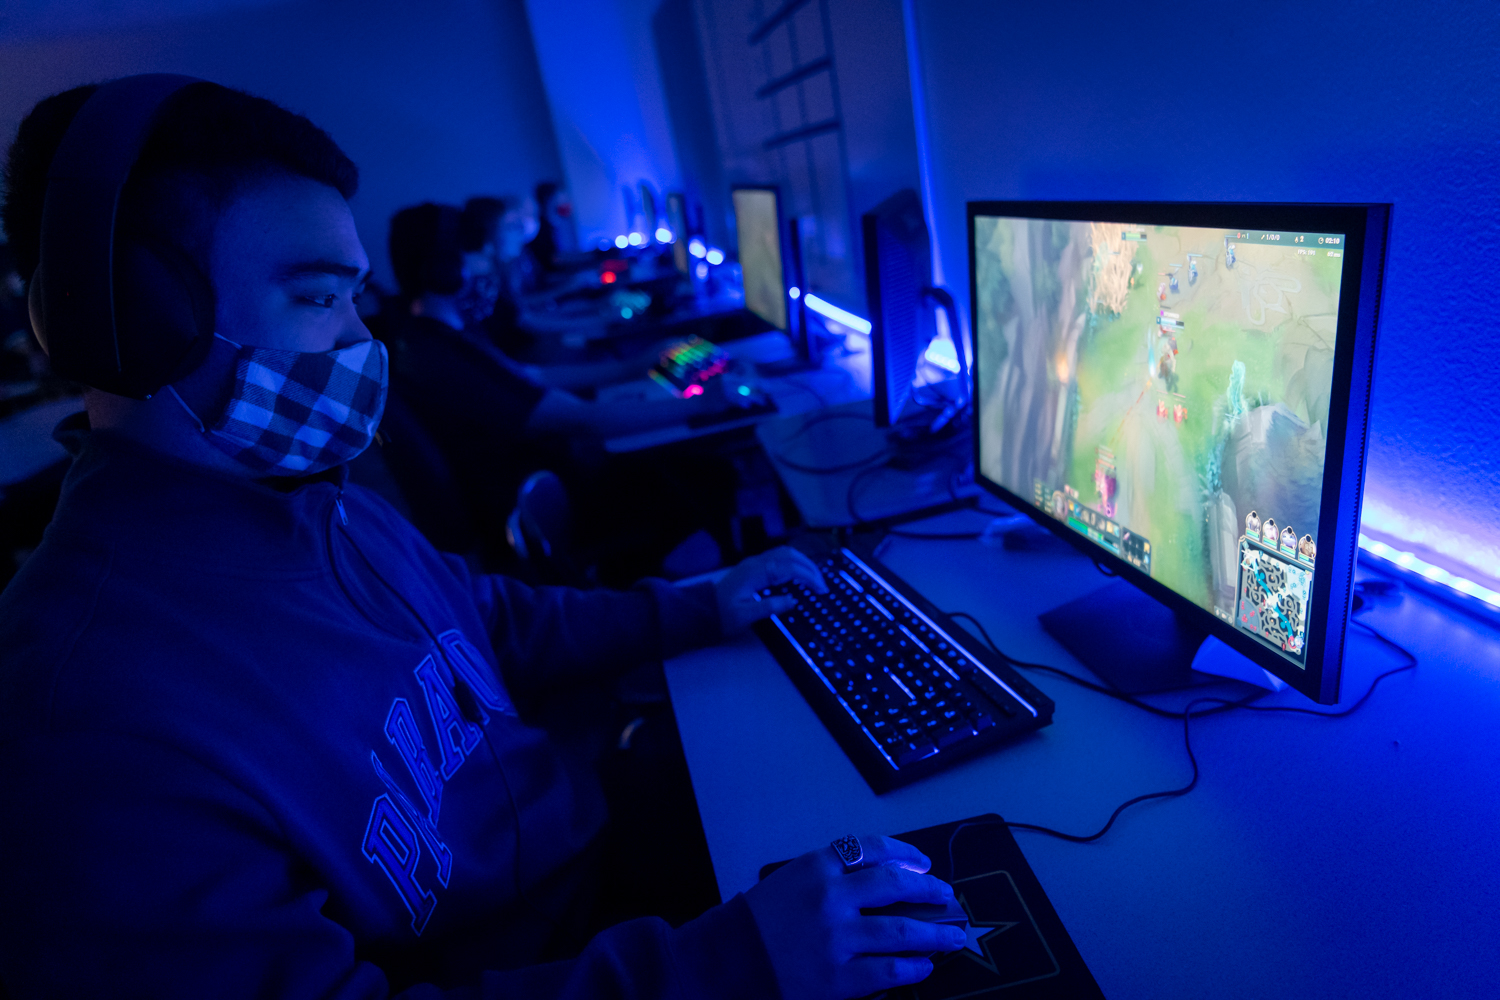 A student practices an esport game at Willow Canyon High School